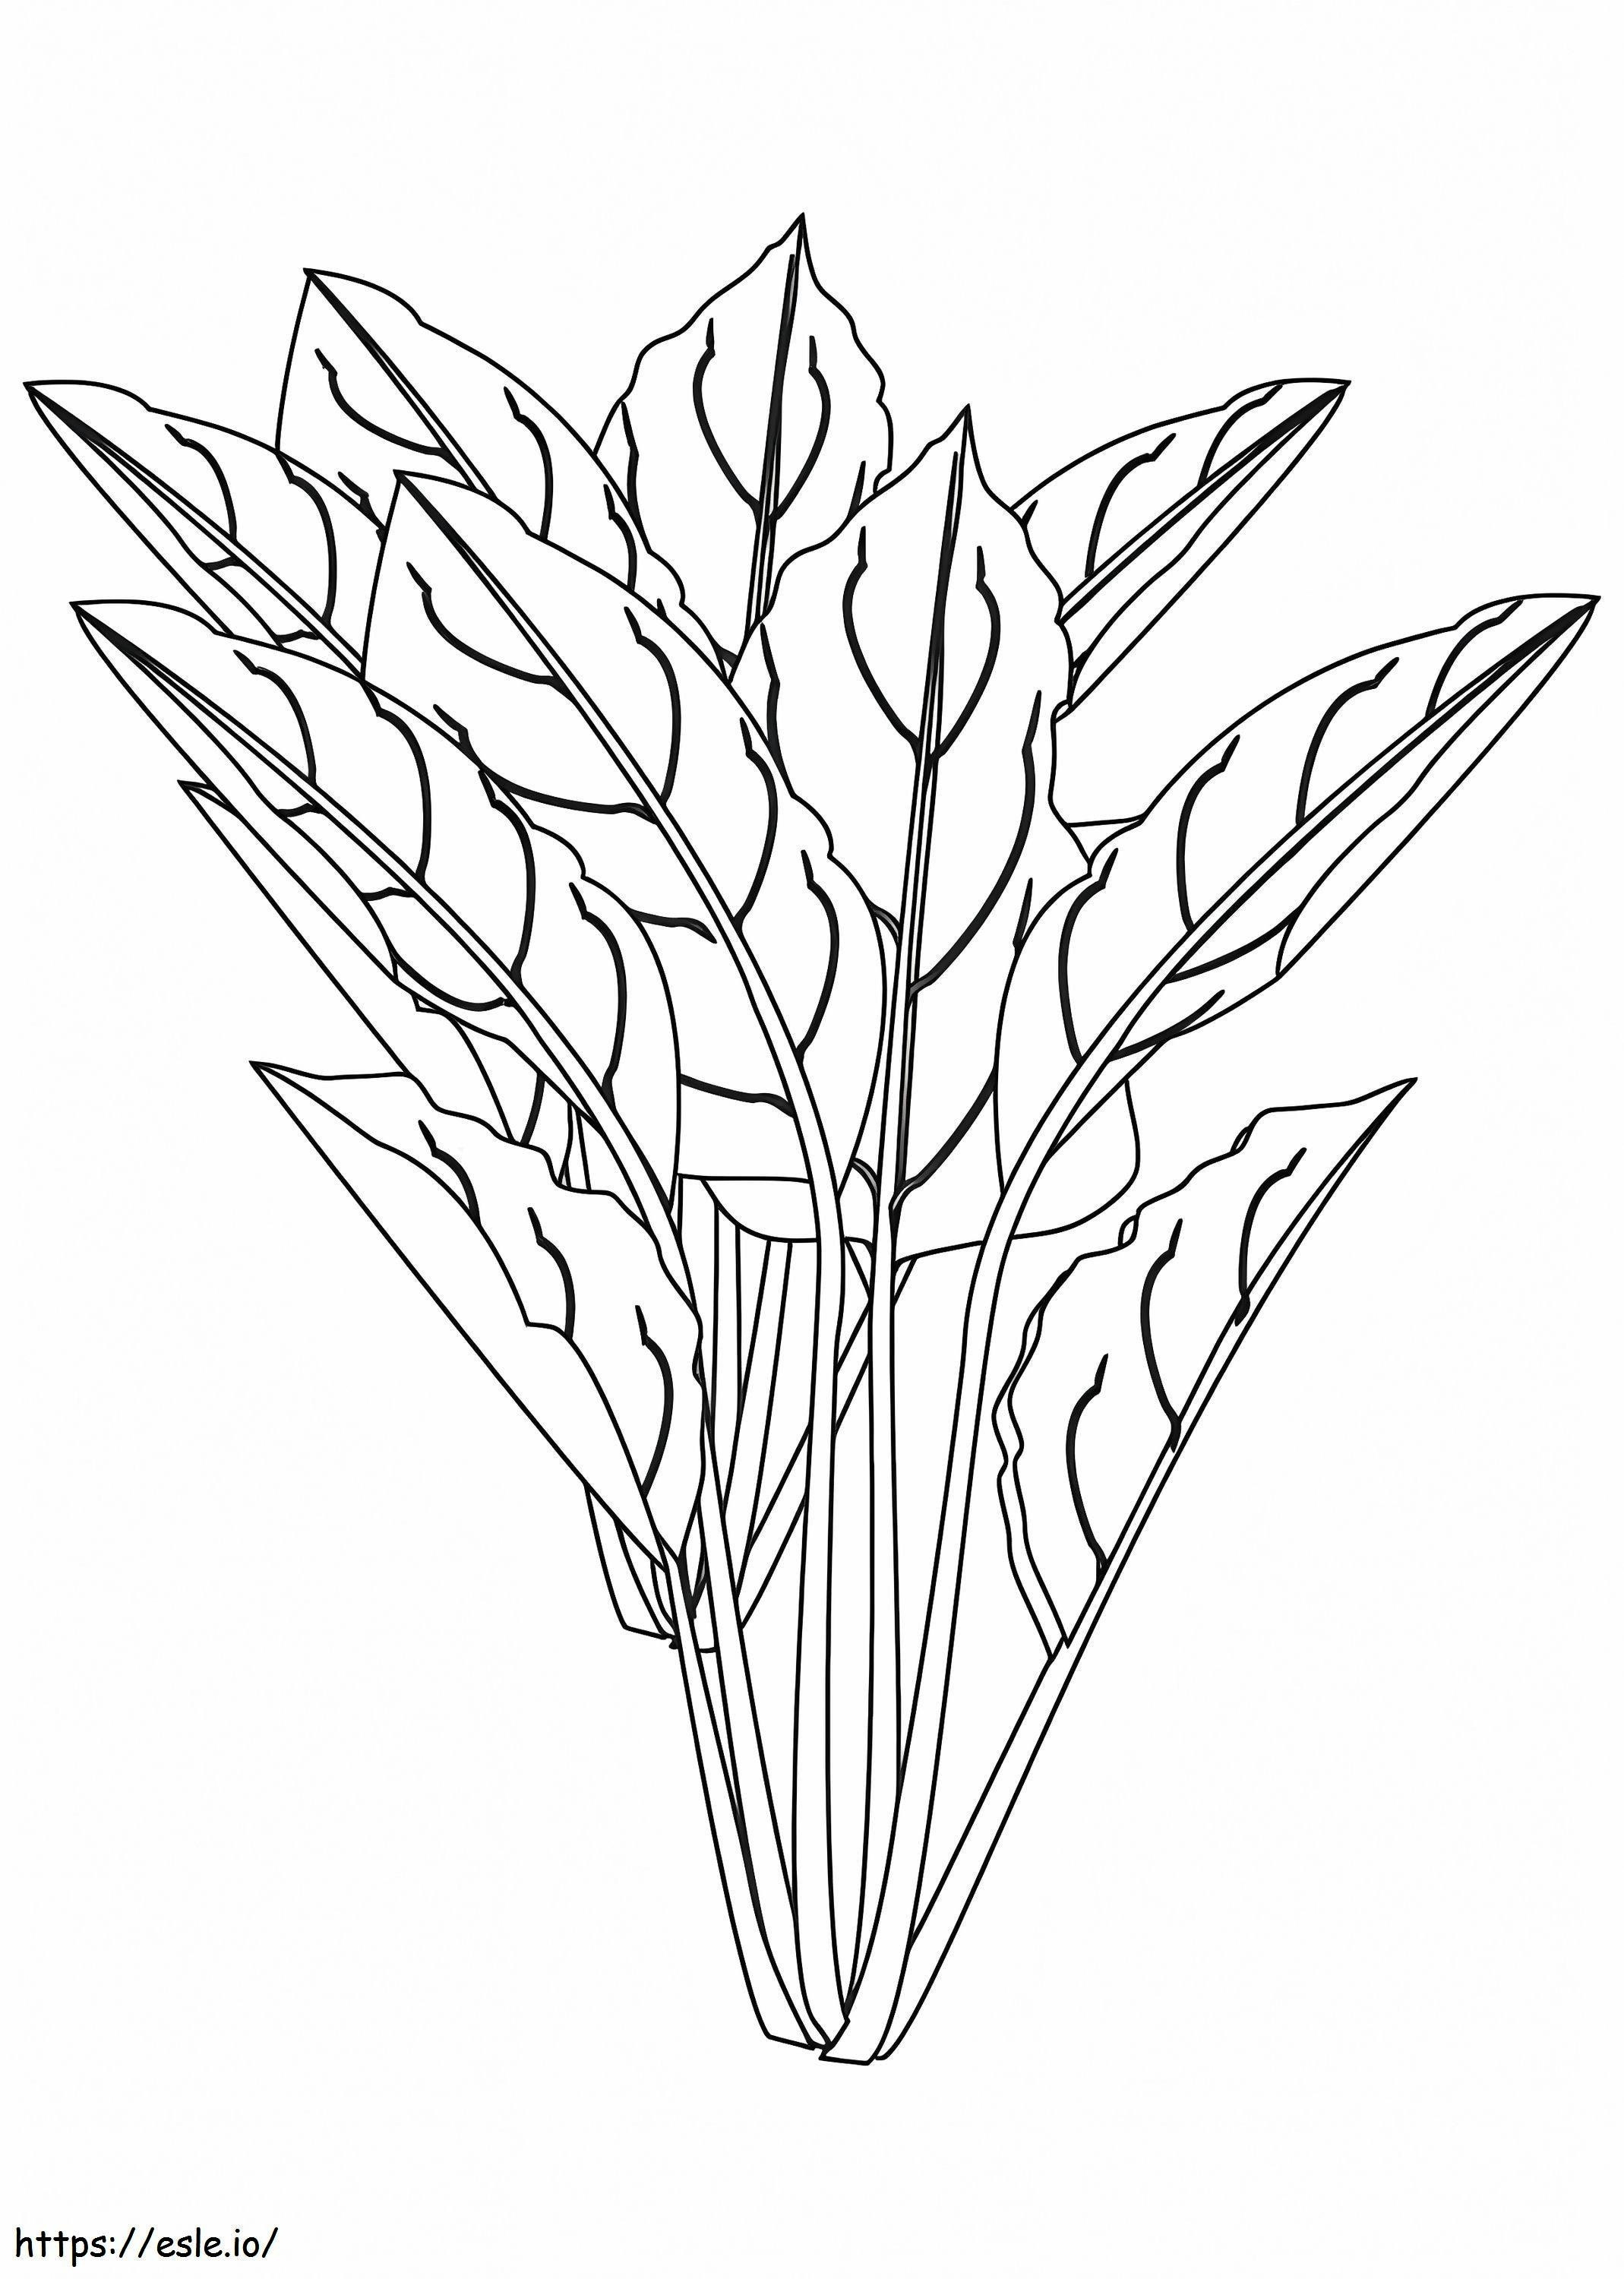 Spinach 3 coloring page